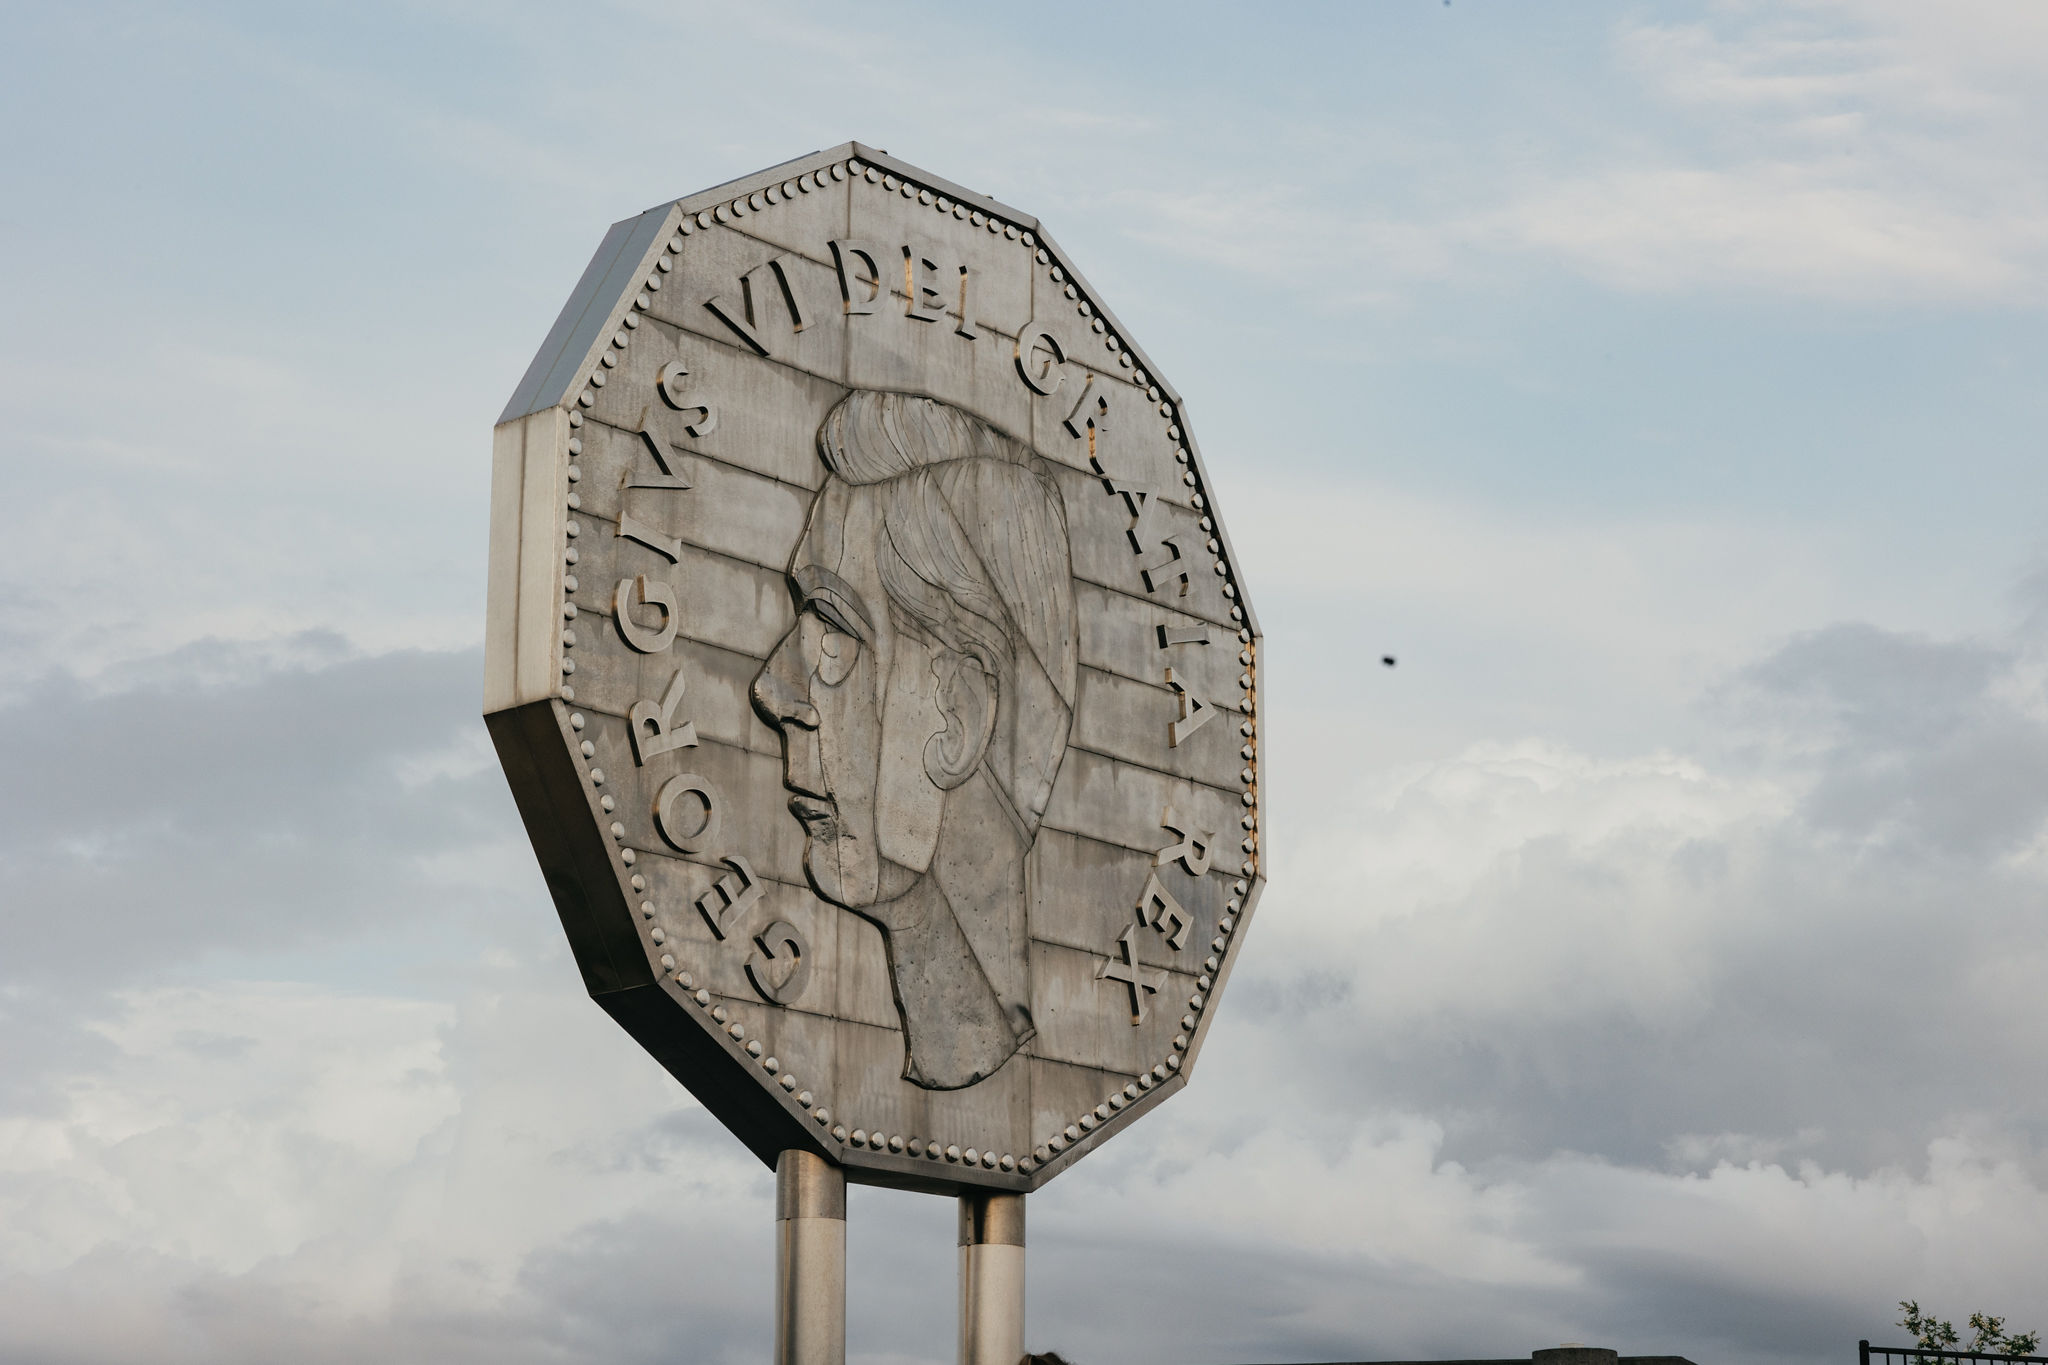 the heads side of Sudbury's Big Nickel Monument, showing the profile of King George VI